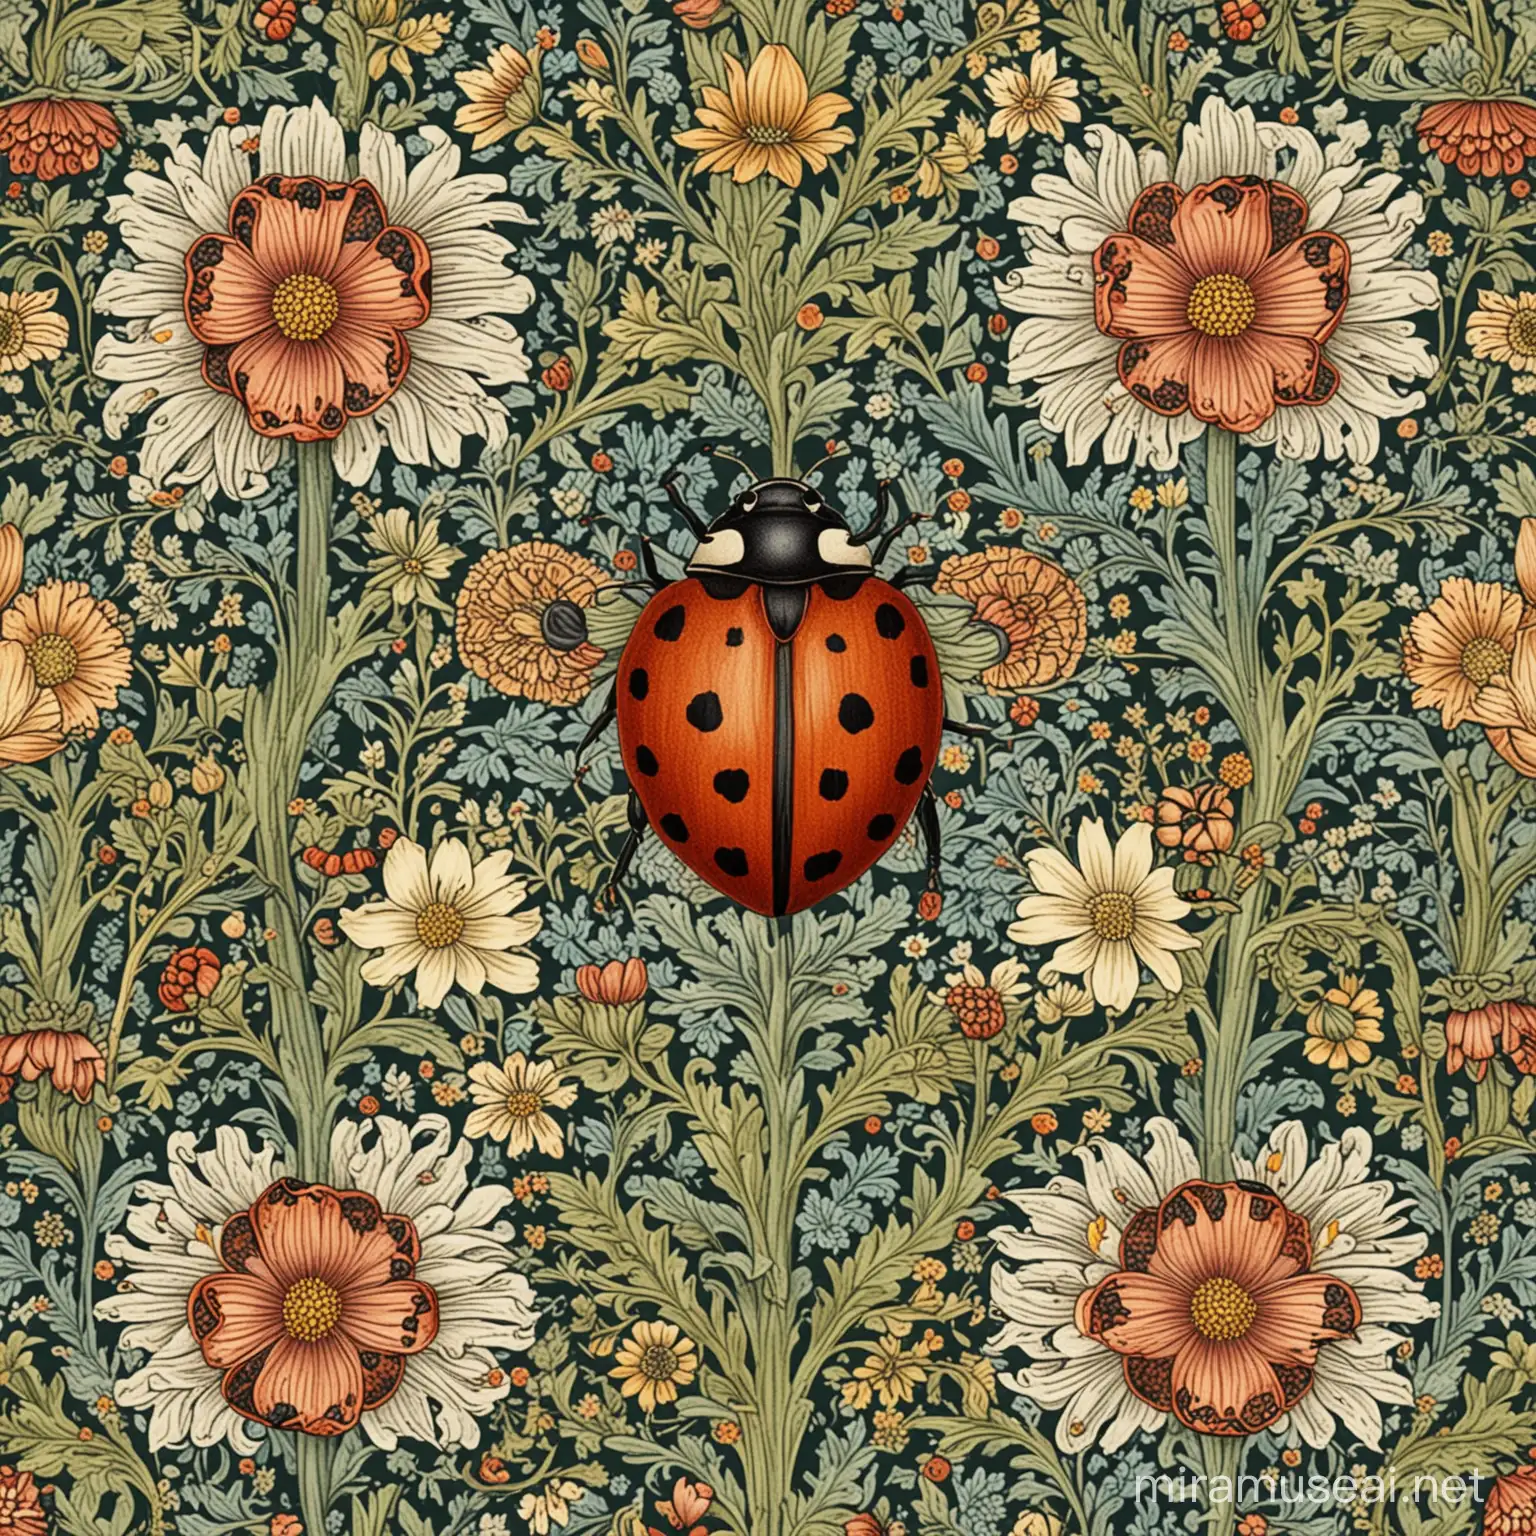 William Morris Style design with a lady bug and flowers